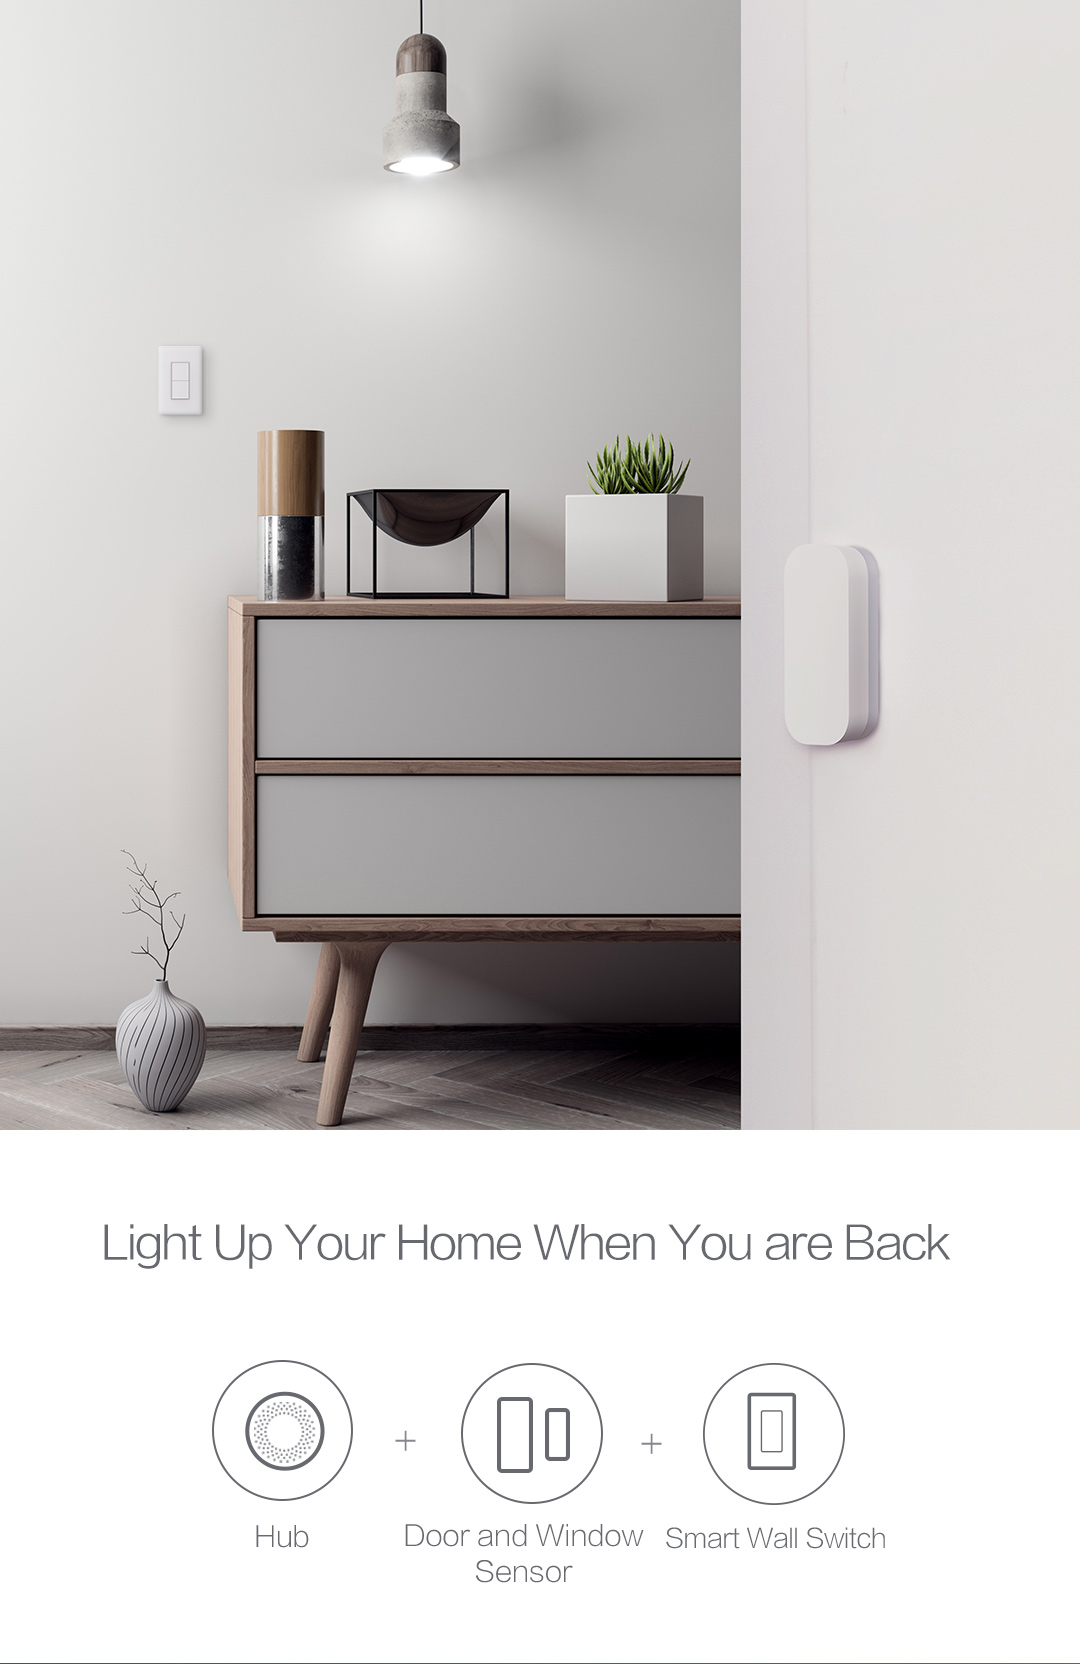 Smart home lighting control with our smart wall switch and door sensor